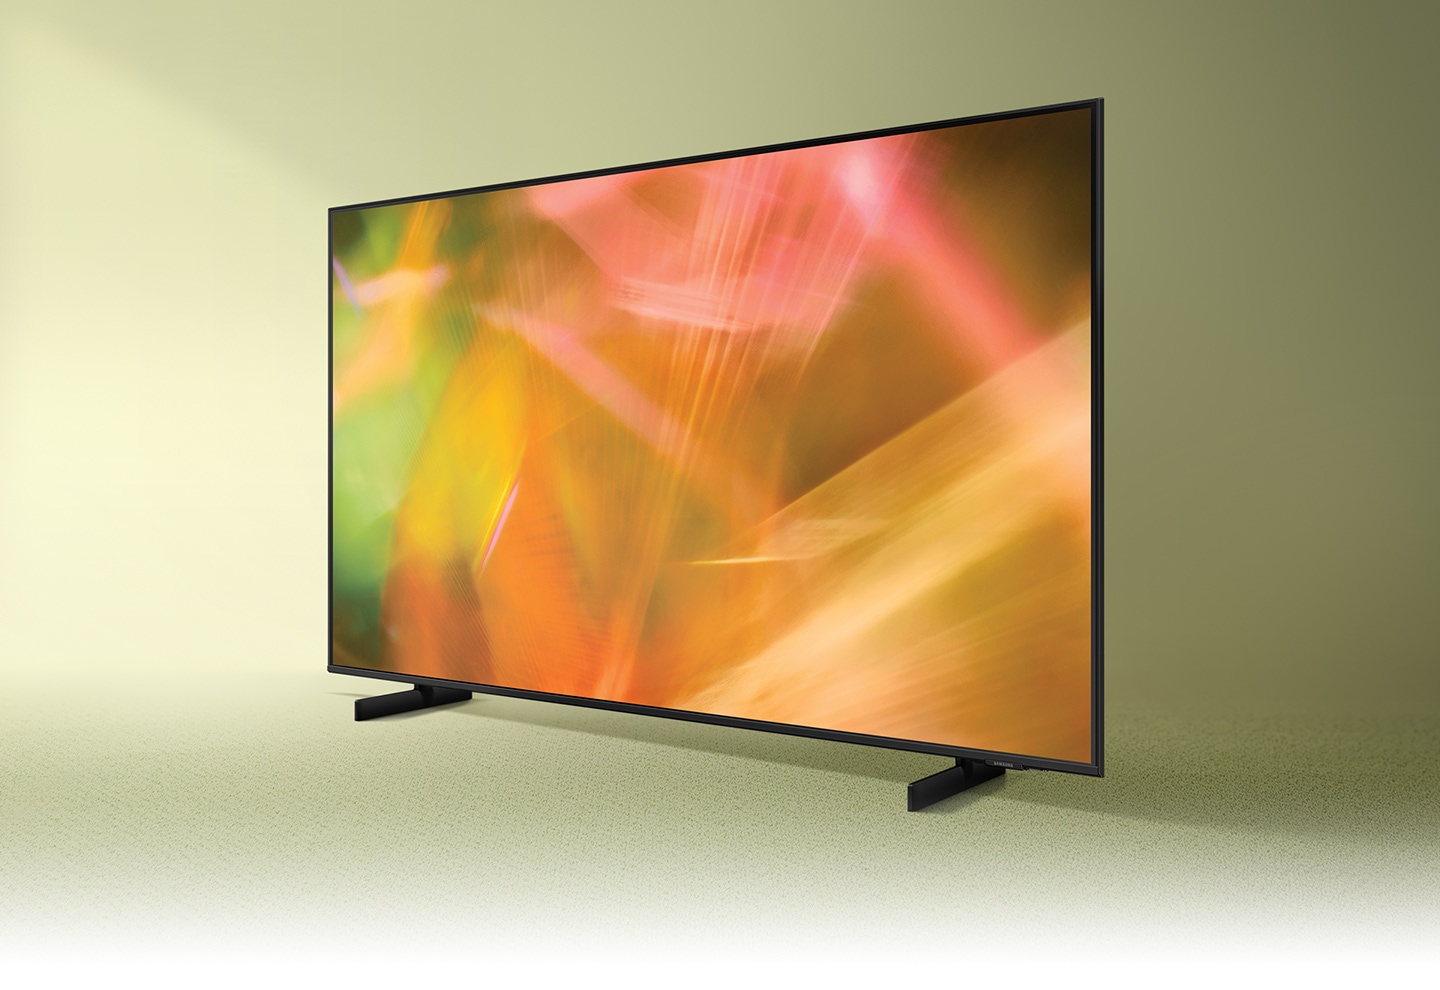 latin-feature-vivid-crystal-color-on-our-slimmest-profile-417951984?$FB_TYPE_A_MO_JPG$ Smart TV 65" | Samsung AU800 UHD 4K